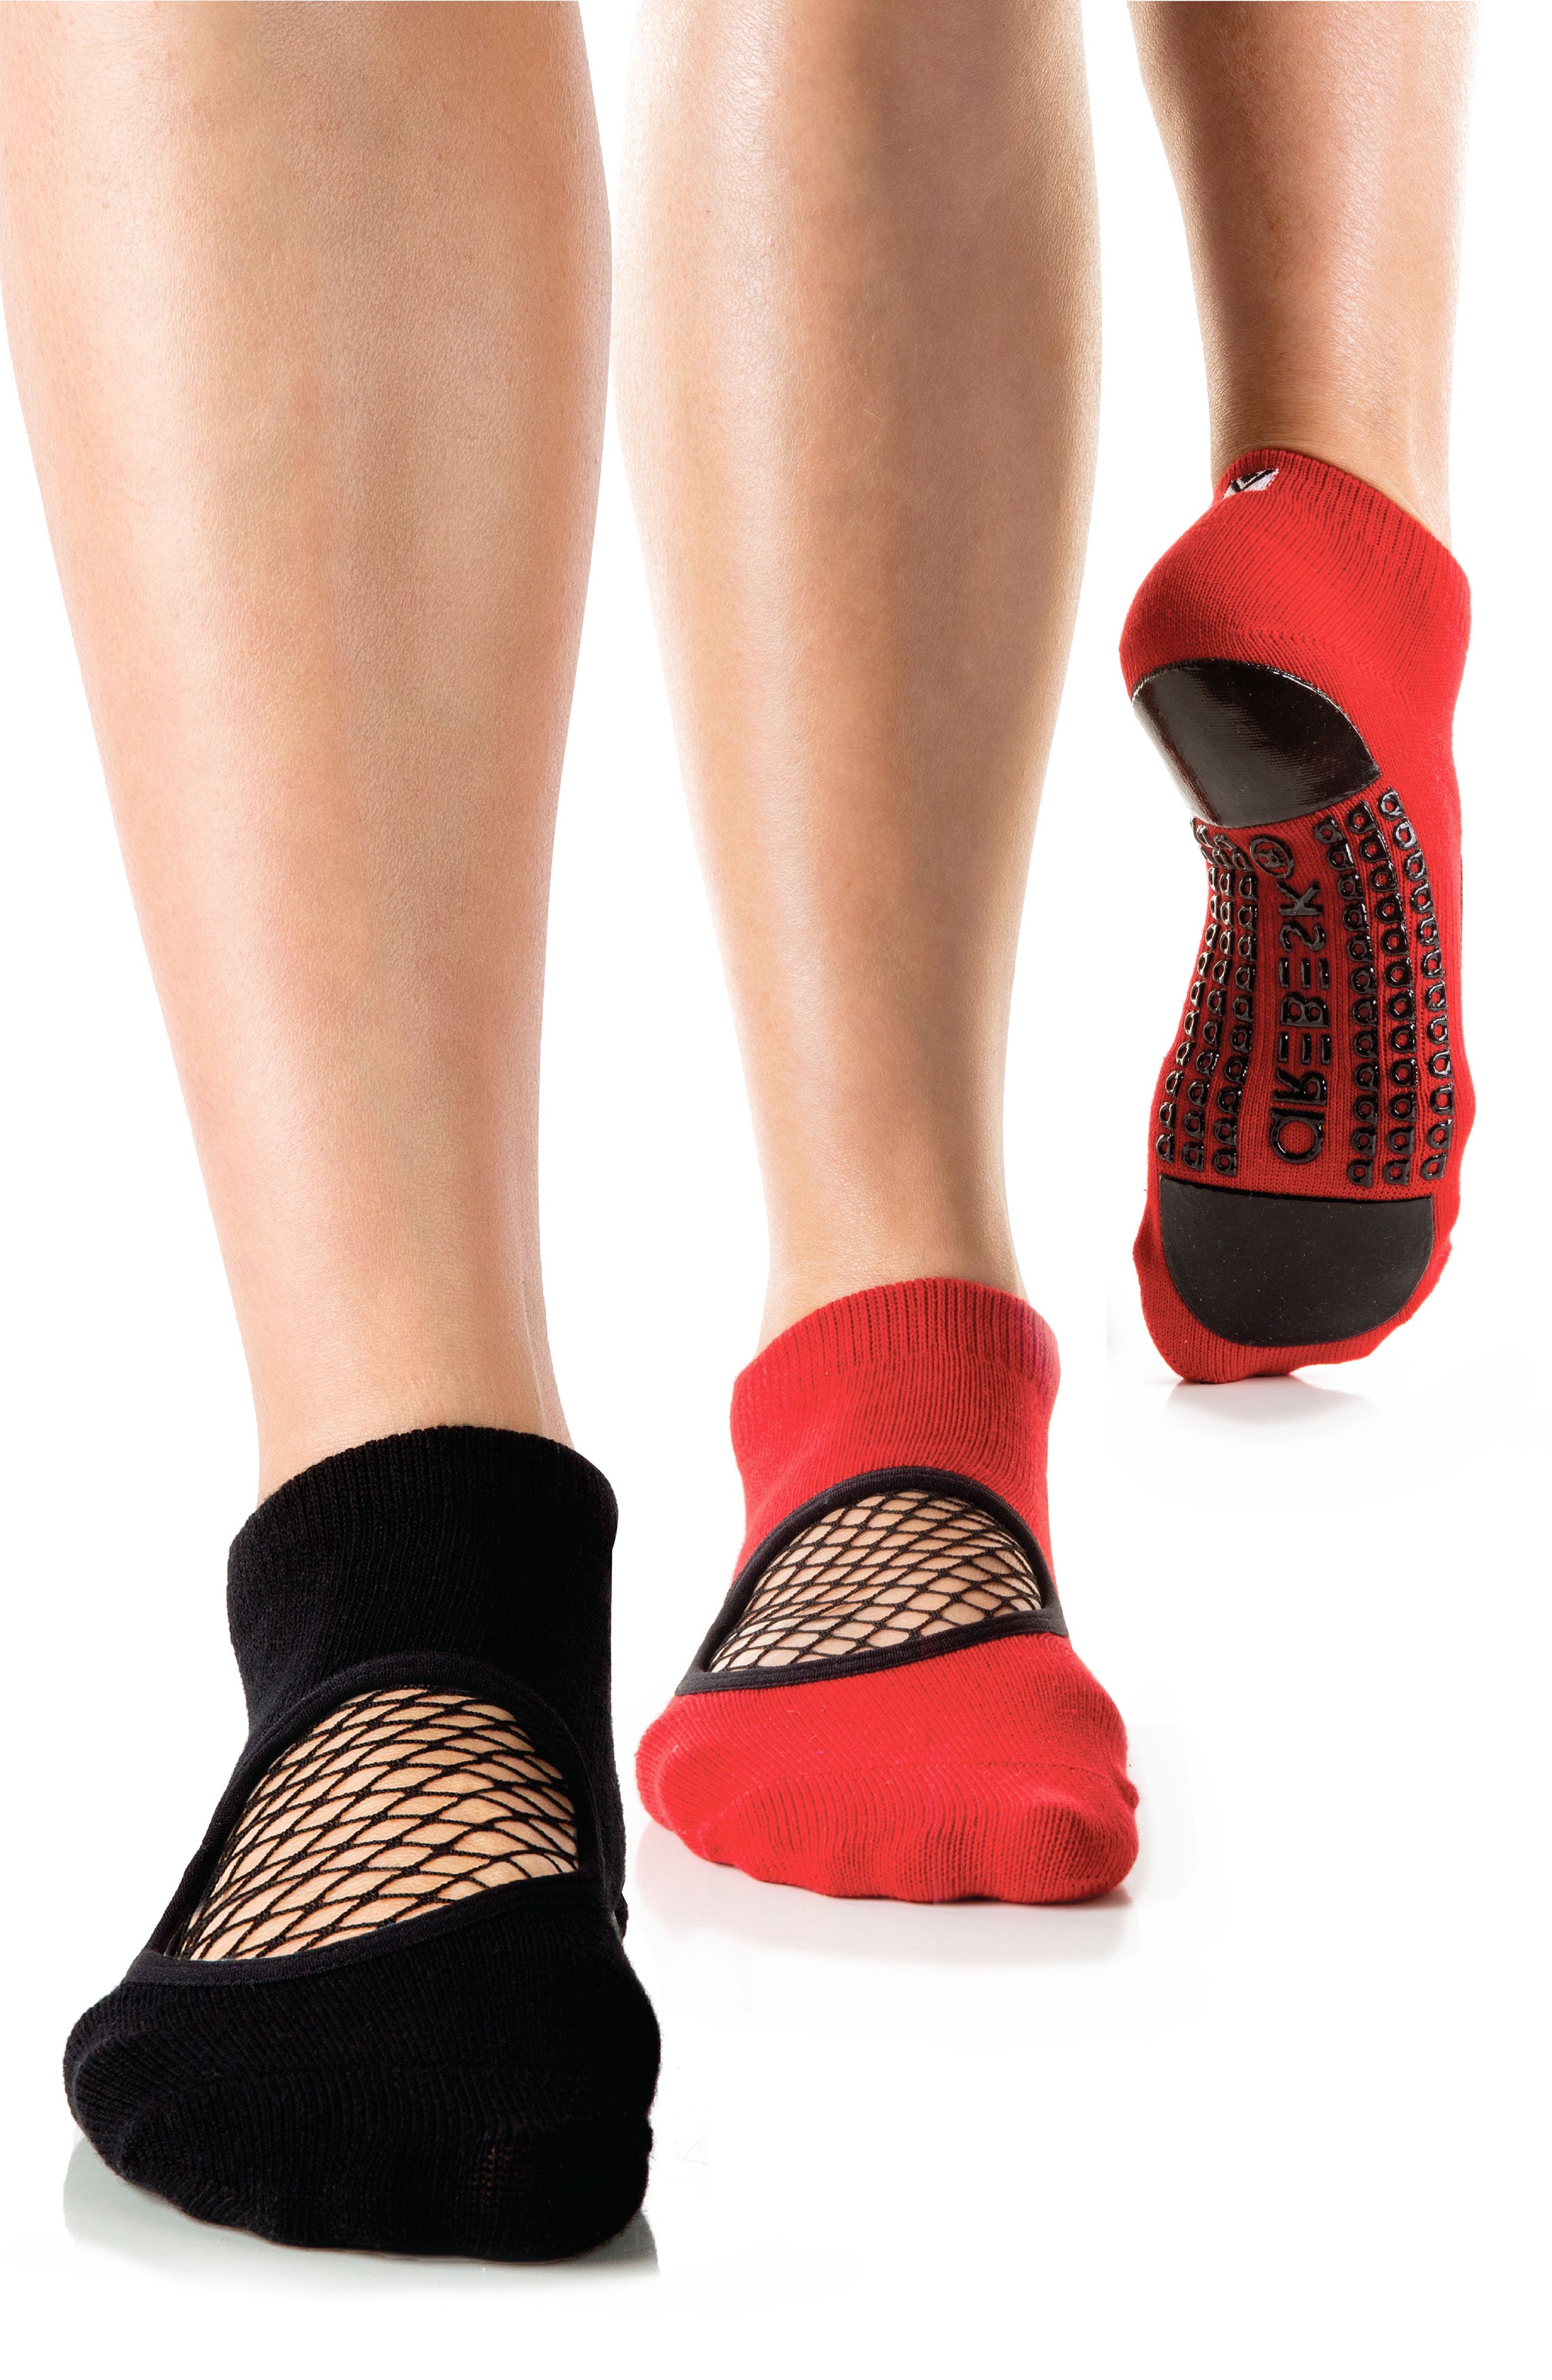 Red/Silver Leg Warmers 2 Pack